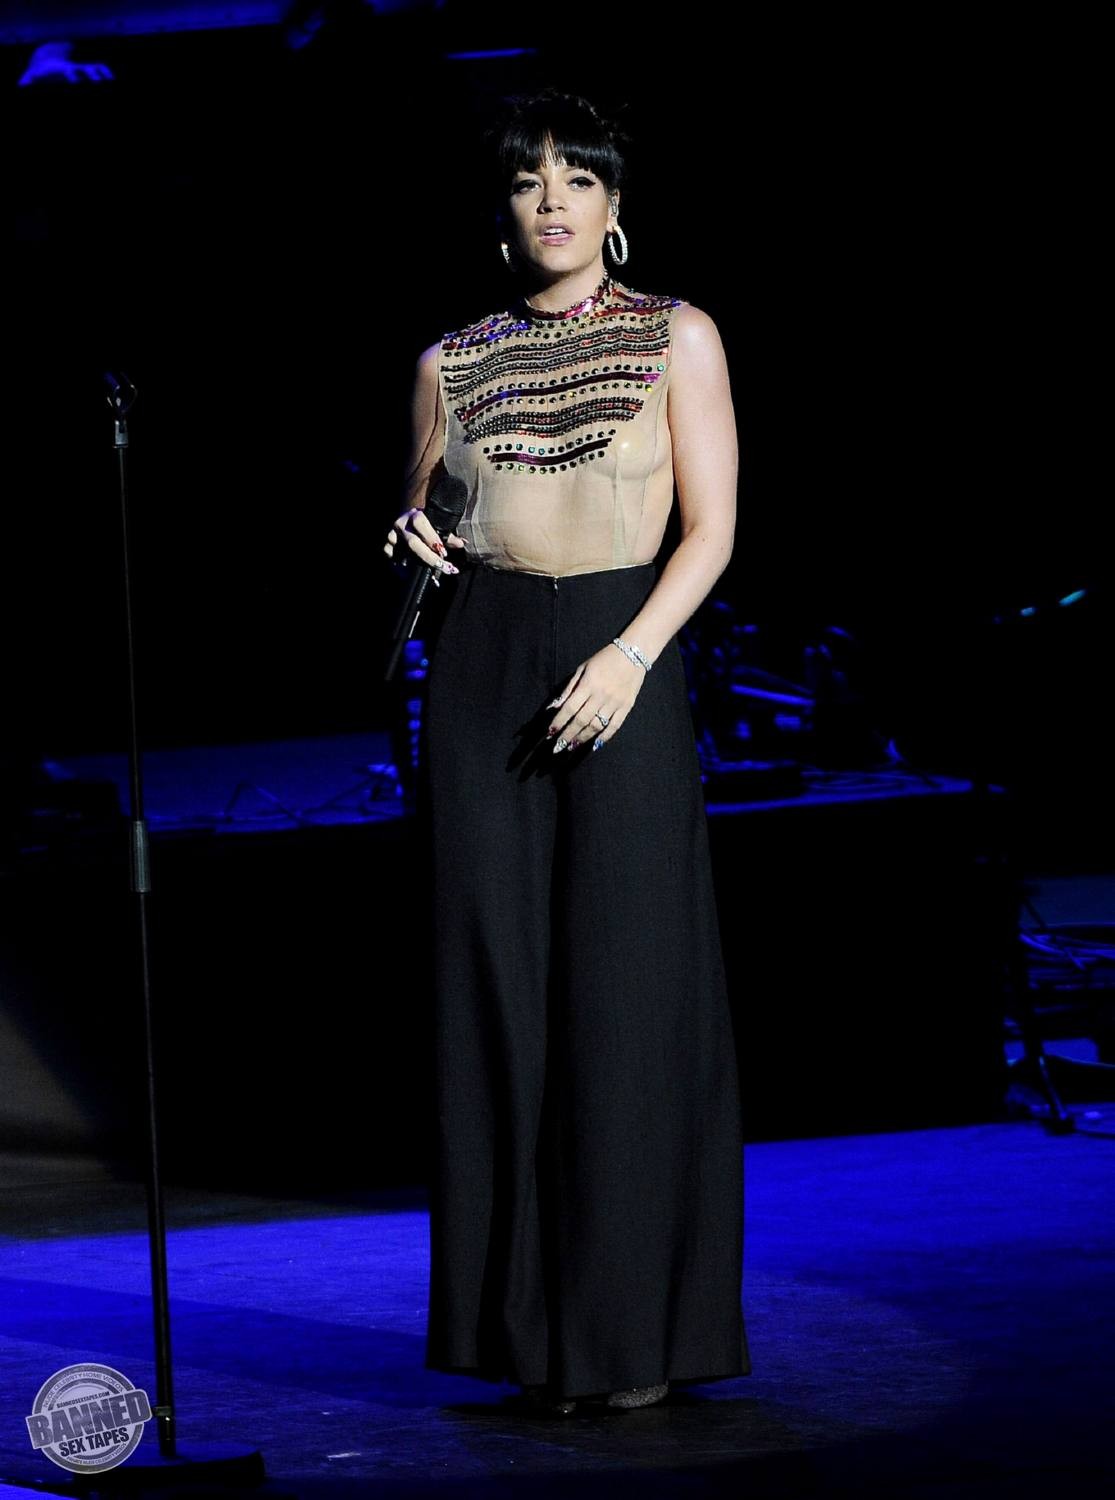 Lily Allen  see her nude tits through transparent top during concert